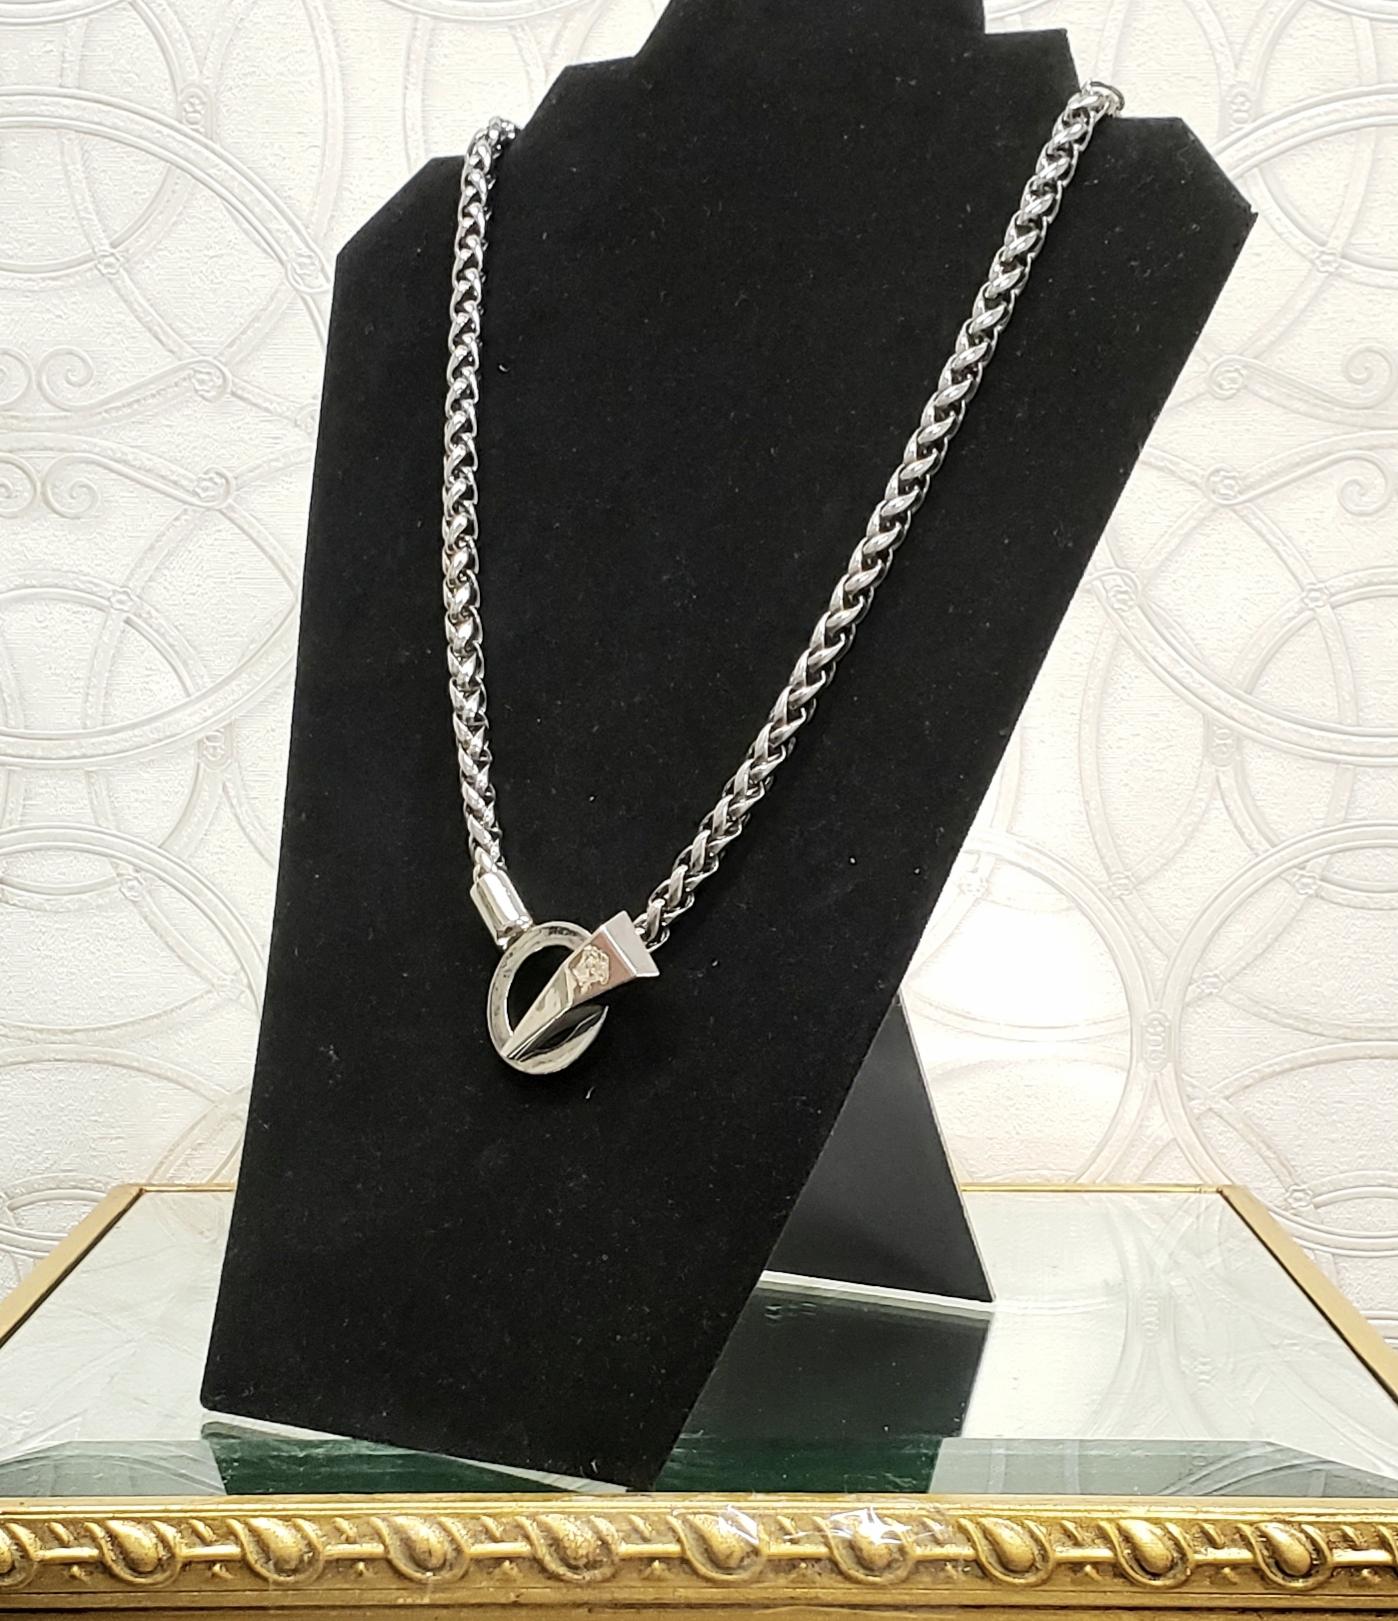 Women's or Men's Spring 2011 L# 16 NEW VERSACE SILVER TONE METAL CHAIN For Sale